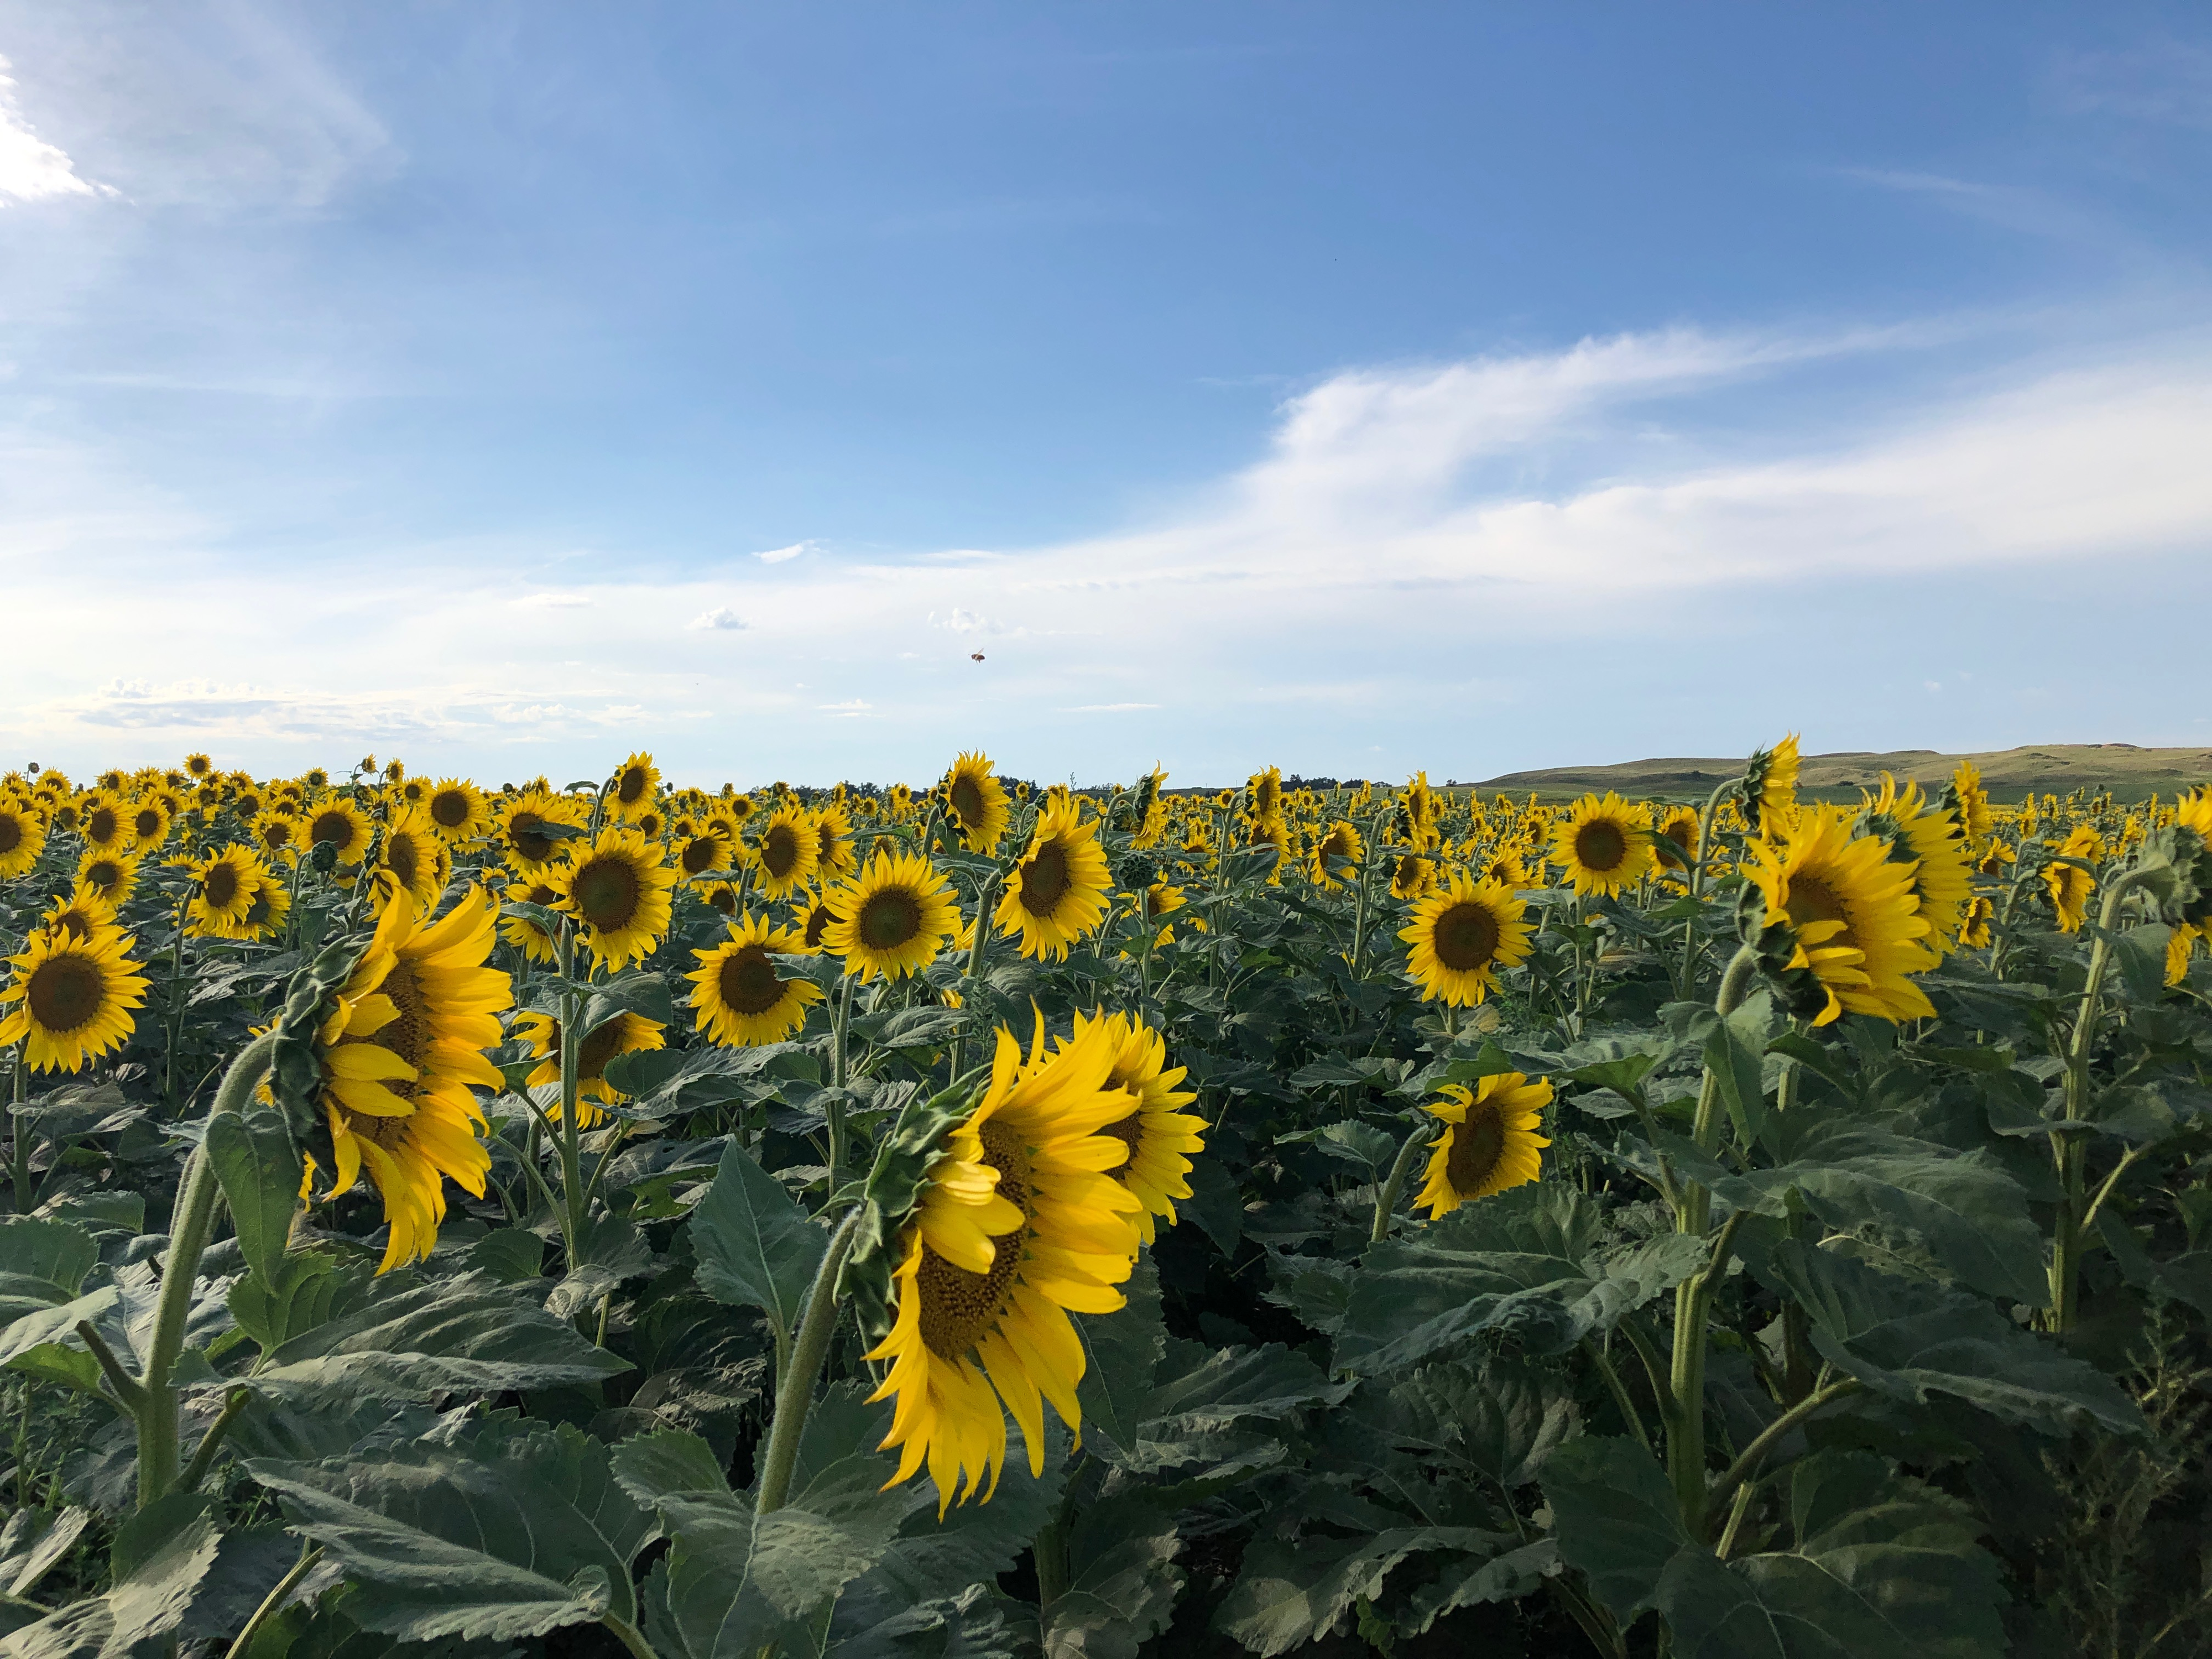 Afternoon Ag News, March 31, 2022: Confection sunflower prices setting new market highs